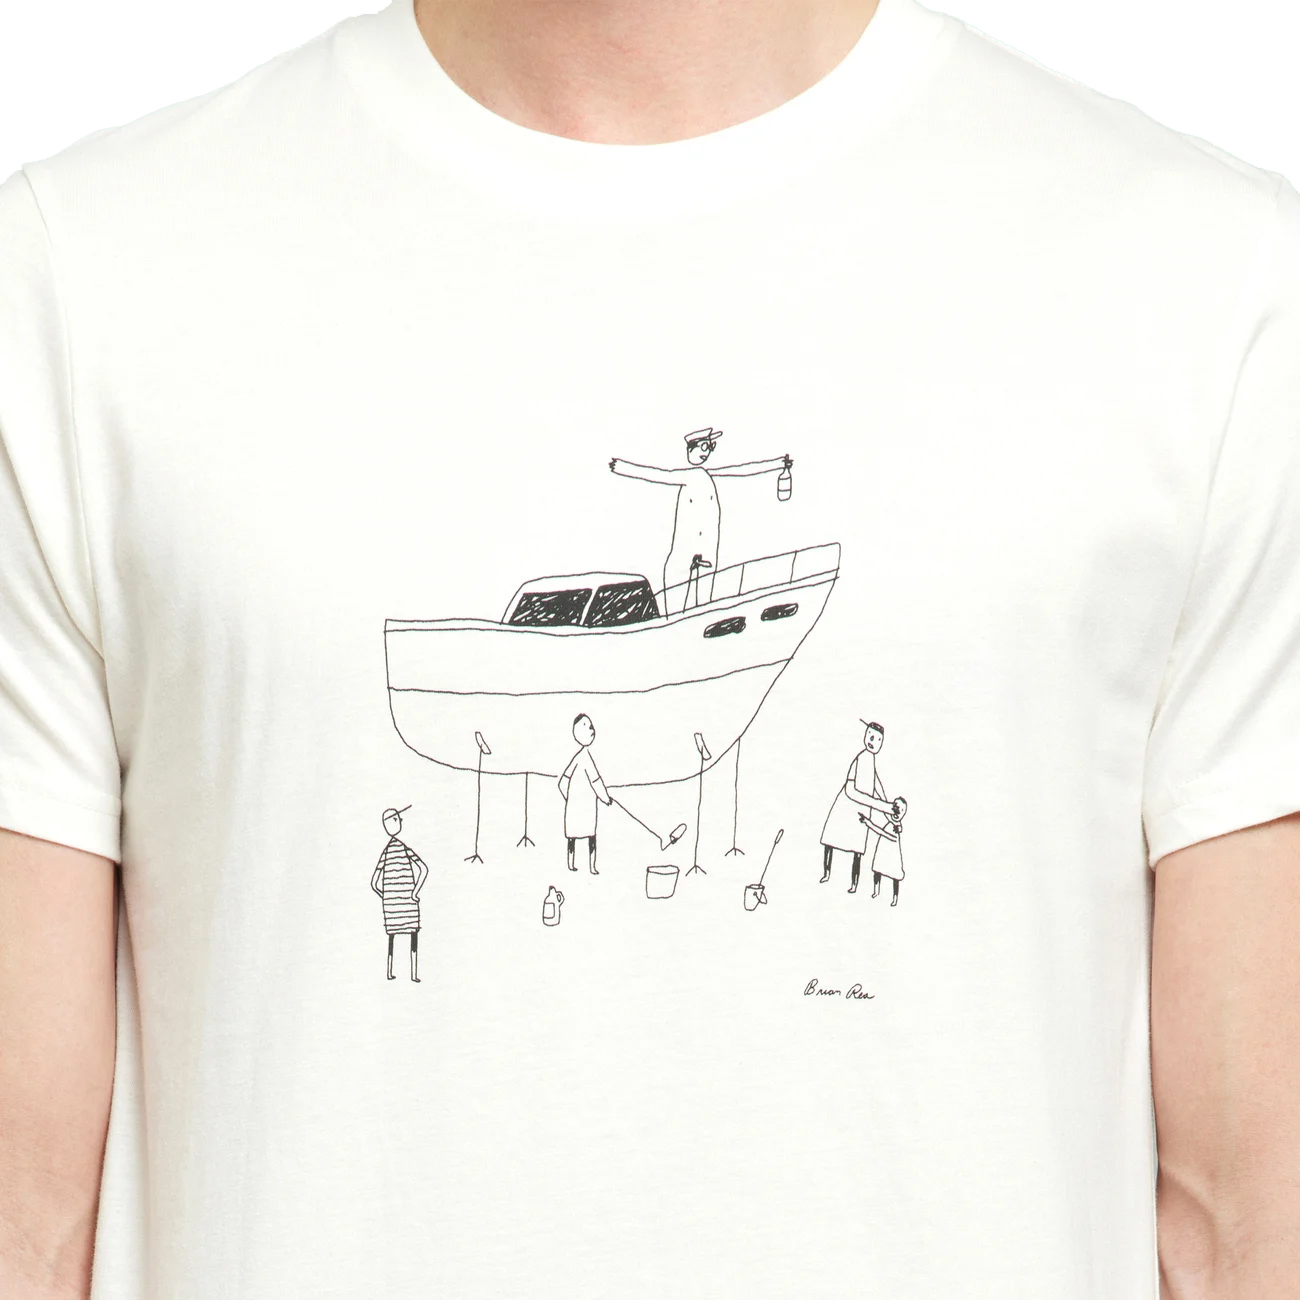 https://www.talidesign.eu/wp/wp-content/uploads/2023/05/dedicated-t-shirt-stockholm-all-out-boat-off-white.jpg